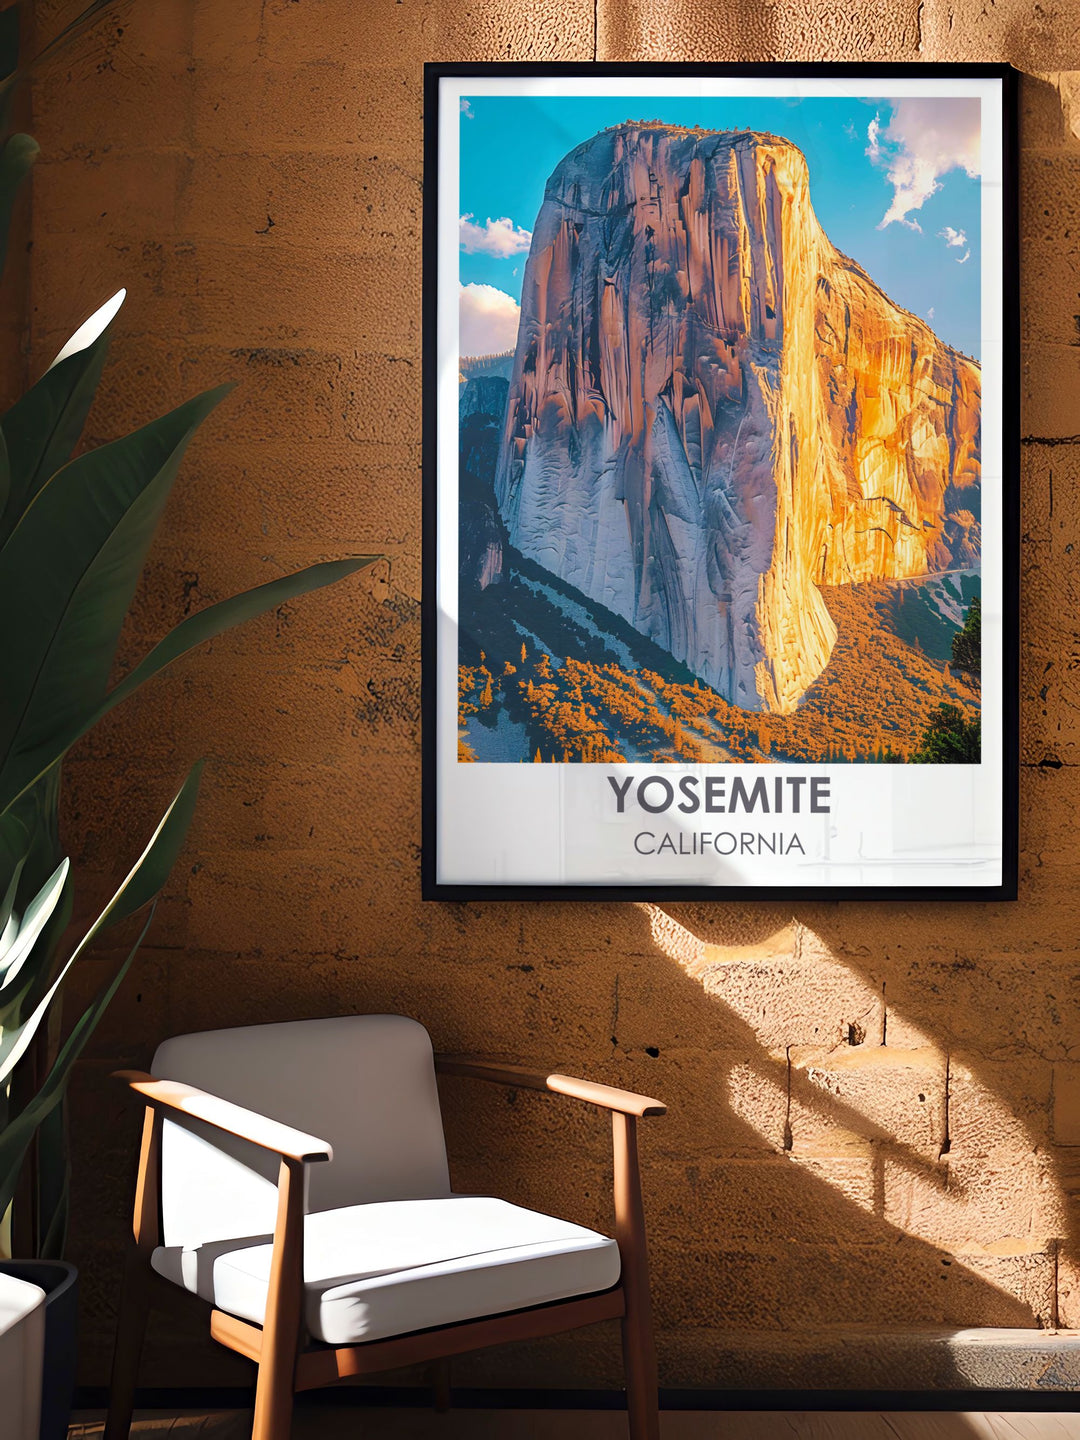 A detailed illustration of Yosemites El Capitan, emphasizing its sheer face and climbing allure, perfect for celebrating the natural grandeur and rugged beauty of this famous landmark.